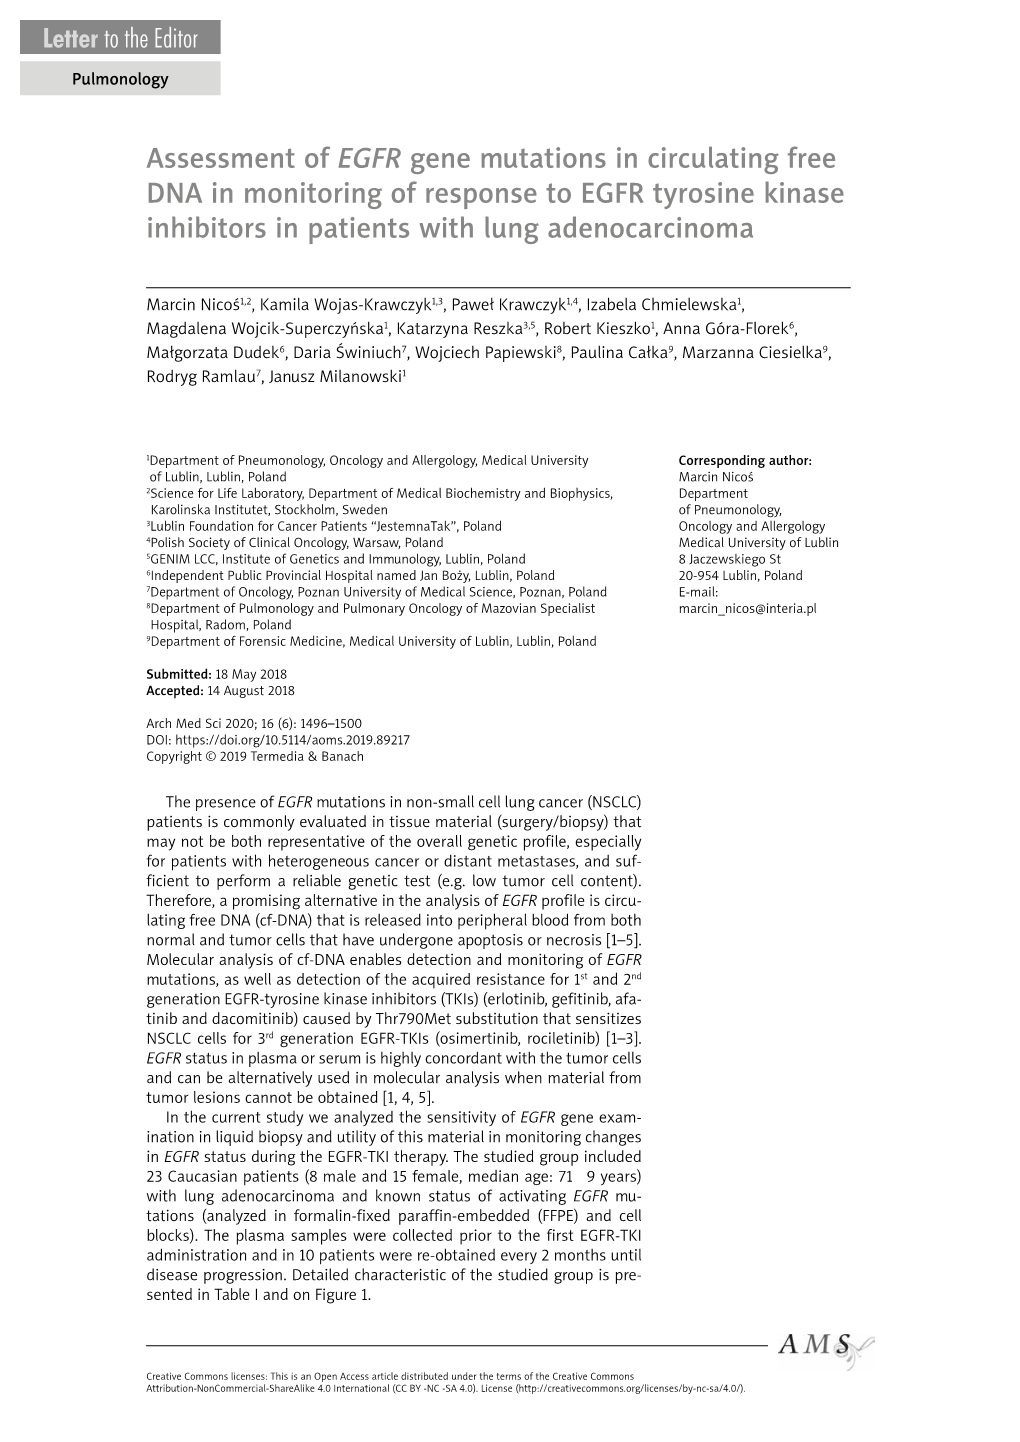 Assessment of EGFR Gene Mutations in Circulating Free DNA in Monitoring of Response to EGFR Tyrosine Kinase Inhibitors in Patients with Lung Adenocarcinoma